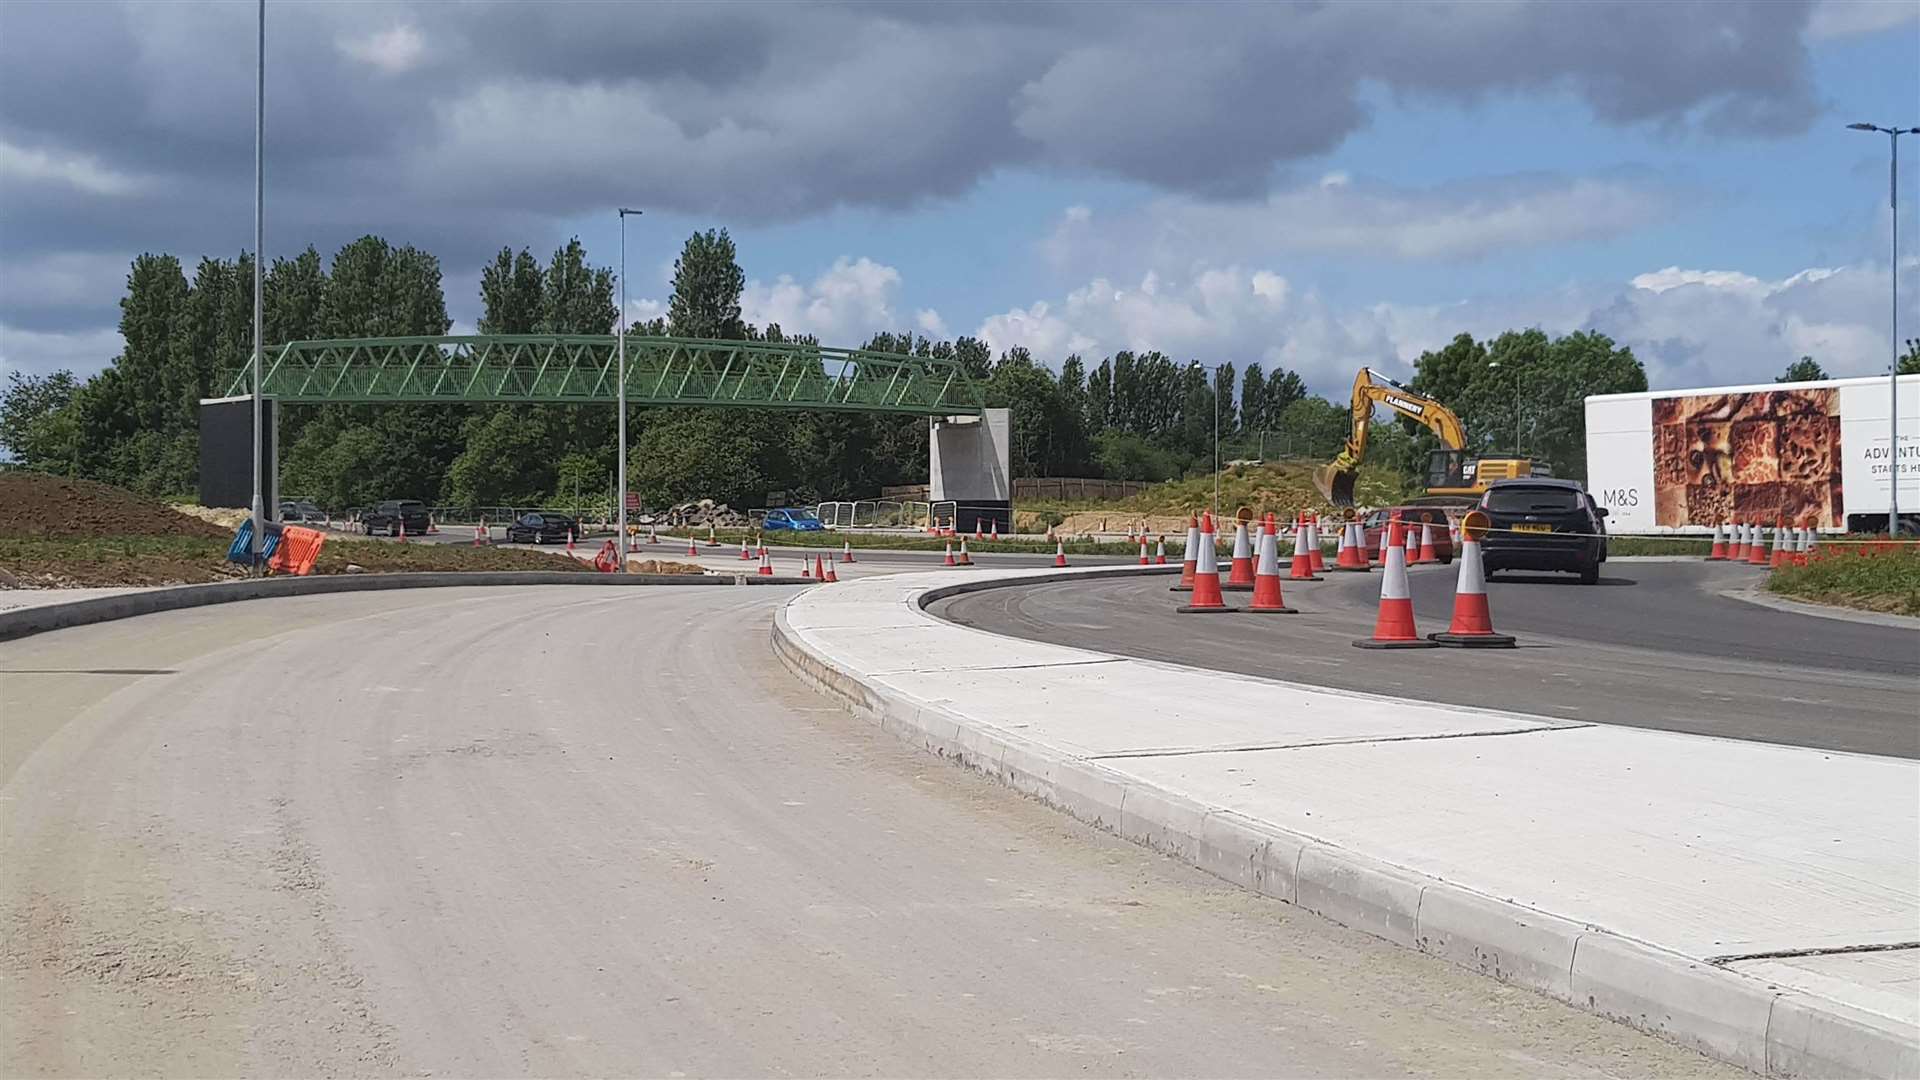 Work to install the new walkway was completed six hours ahead of schedule. Picture: Highways England